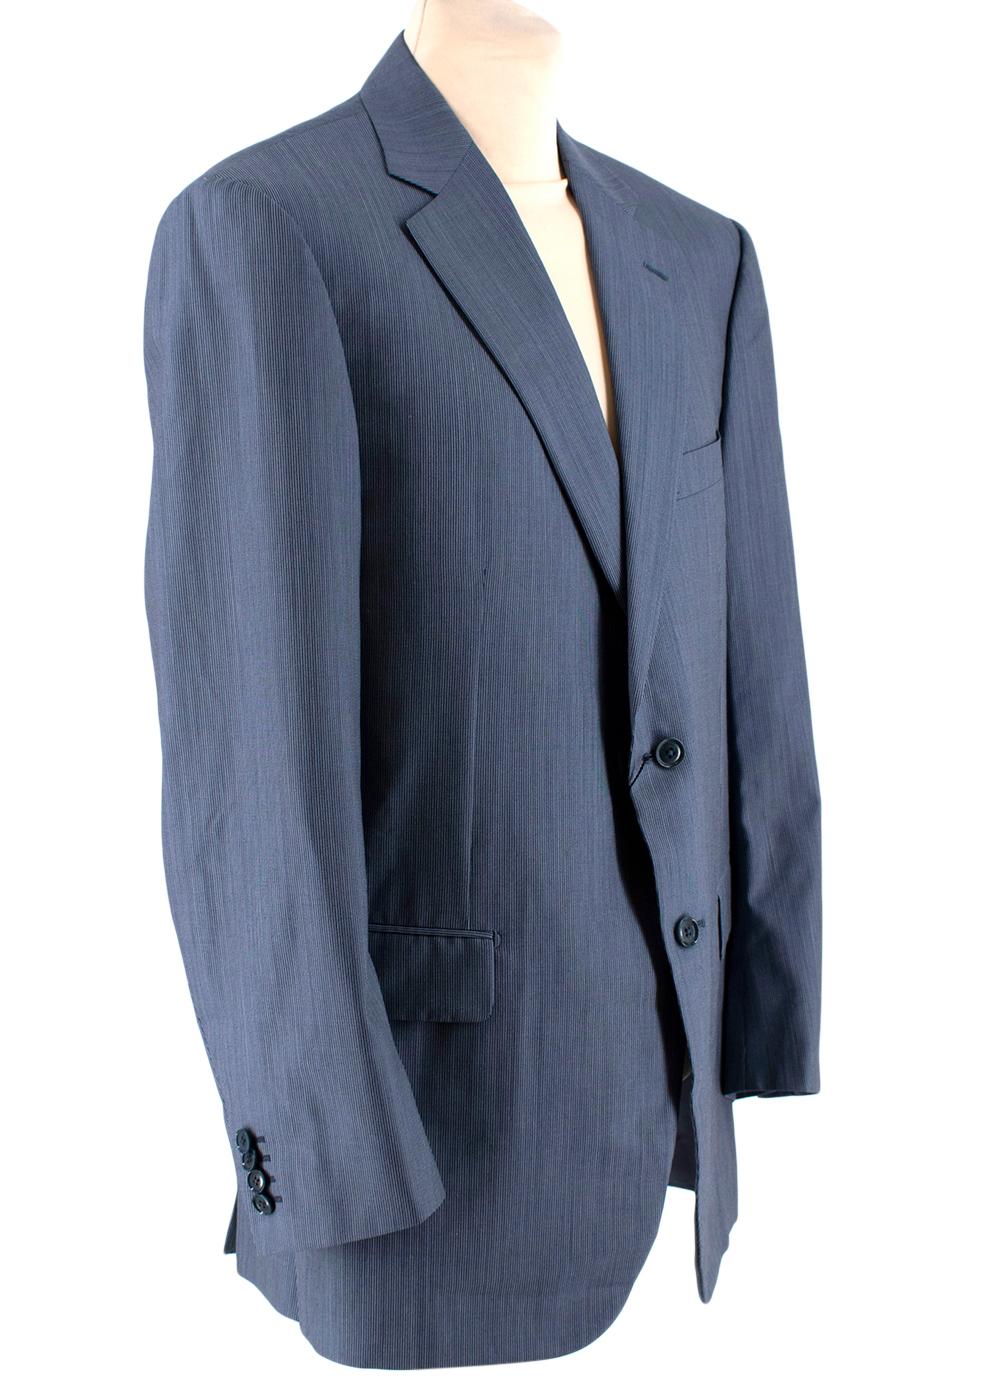 Pal Zileri Blue Pinstripe Single Breasted Suit

Jacket
- Exterior pockets
- Long sleeves
- Button fastening
- Regular fit
- Jacket: Fully lined

Trousers
- Zip fastening 
- Flat front 
- Side pockets 
- Buttoned pockets 

Made in Italy 

Jacket -